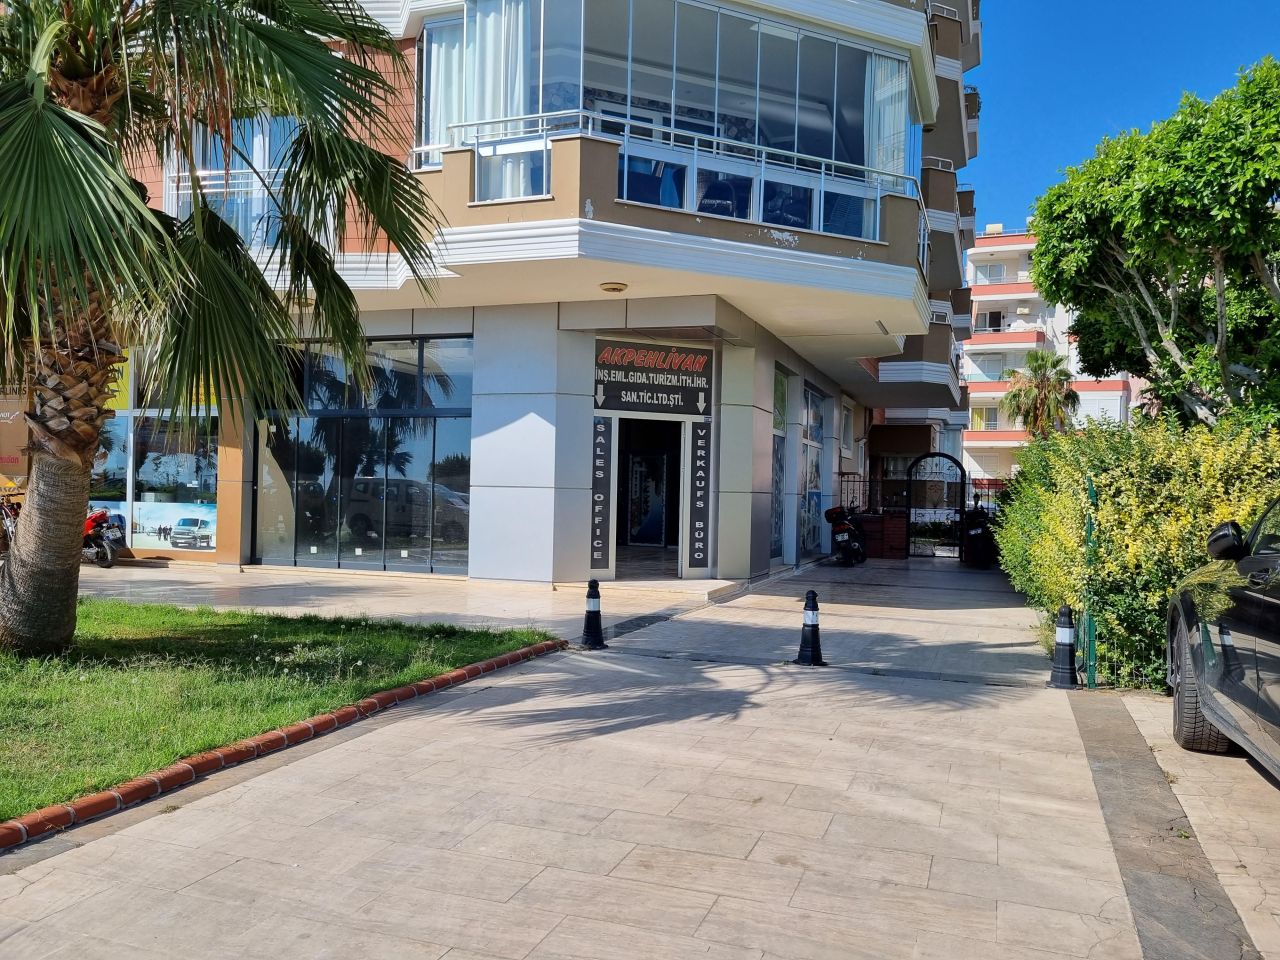 Commercial property in Alanya, Turkey, 105 sq.m - picture 1